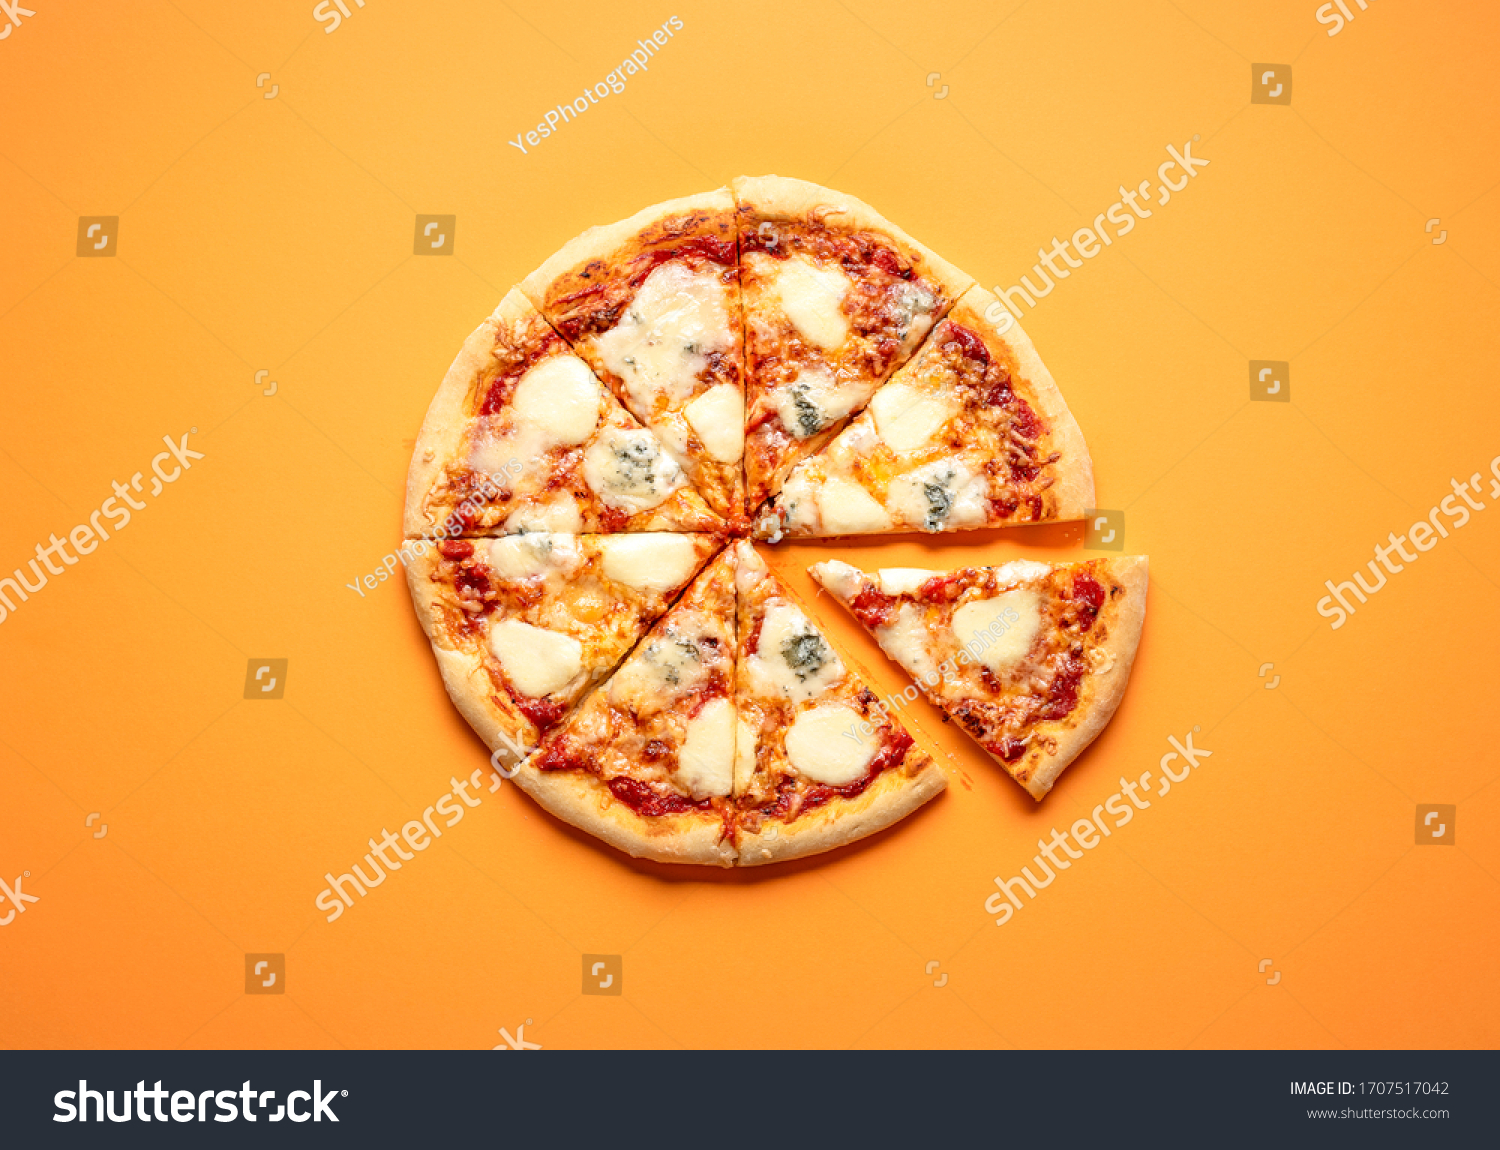 Sliced cheese pizza on an orange background above view. Pizza sliced in eight. Delicious homemade pizza top view. Pizza made only with cheese and tomato sauce. #1707517042